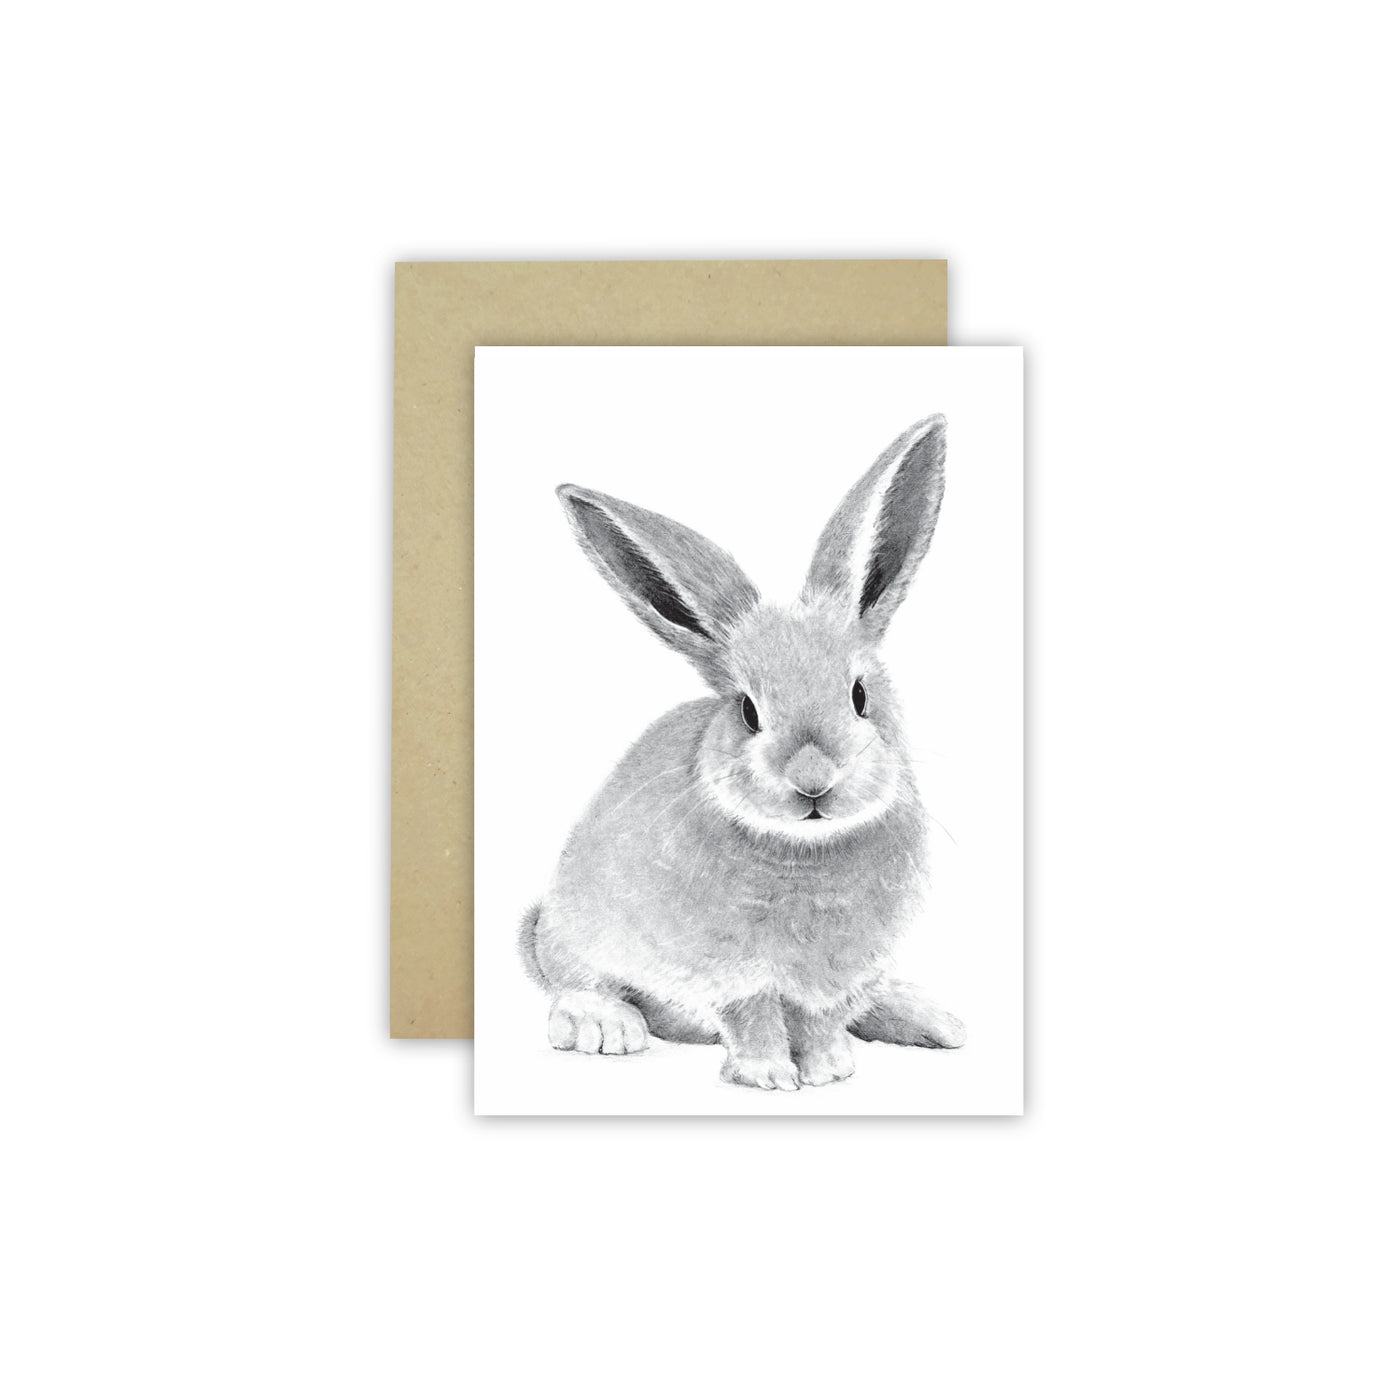 Bunny C6 Card - Wholesale - NEW SIZE